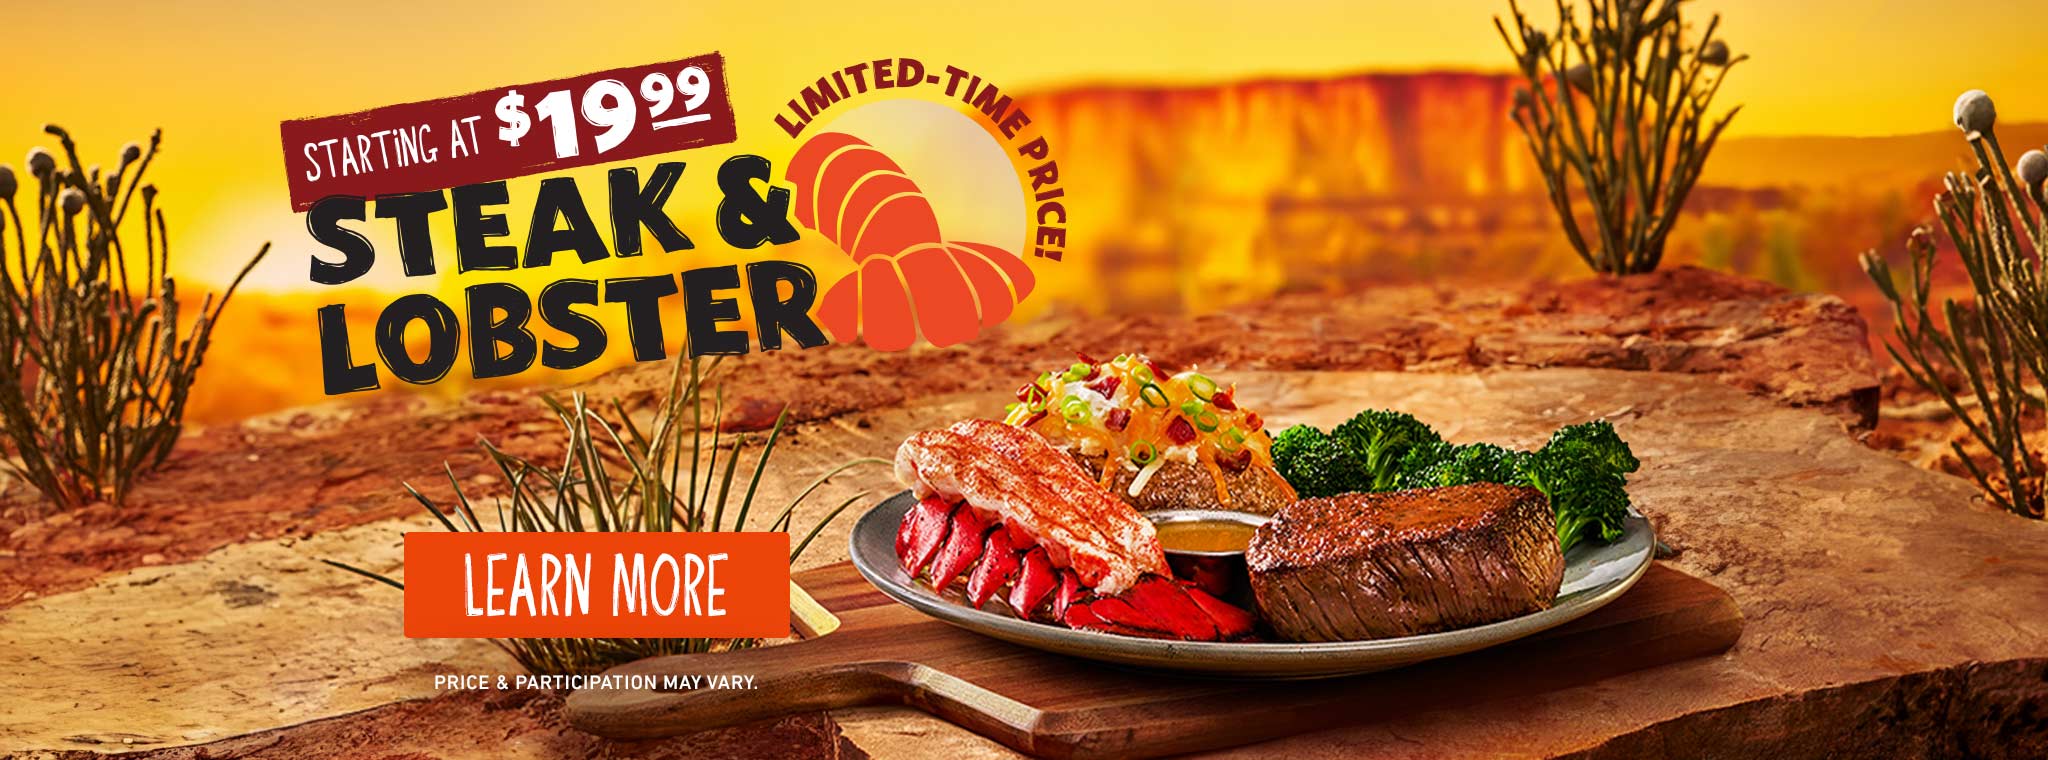 Starting At $19.99 Steak & Lobster. Limited-Time Price! LEARN MORE. Price & participation may vary.